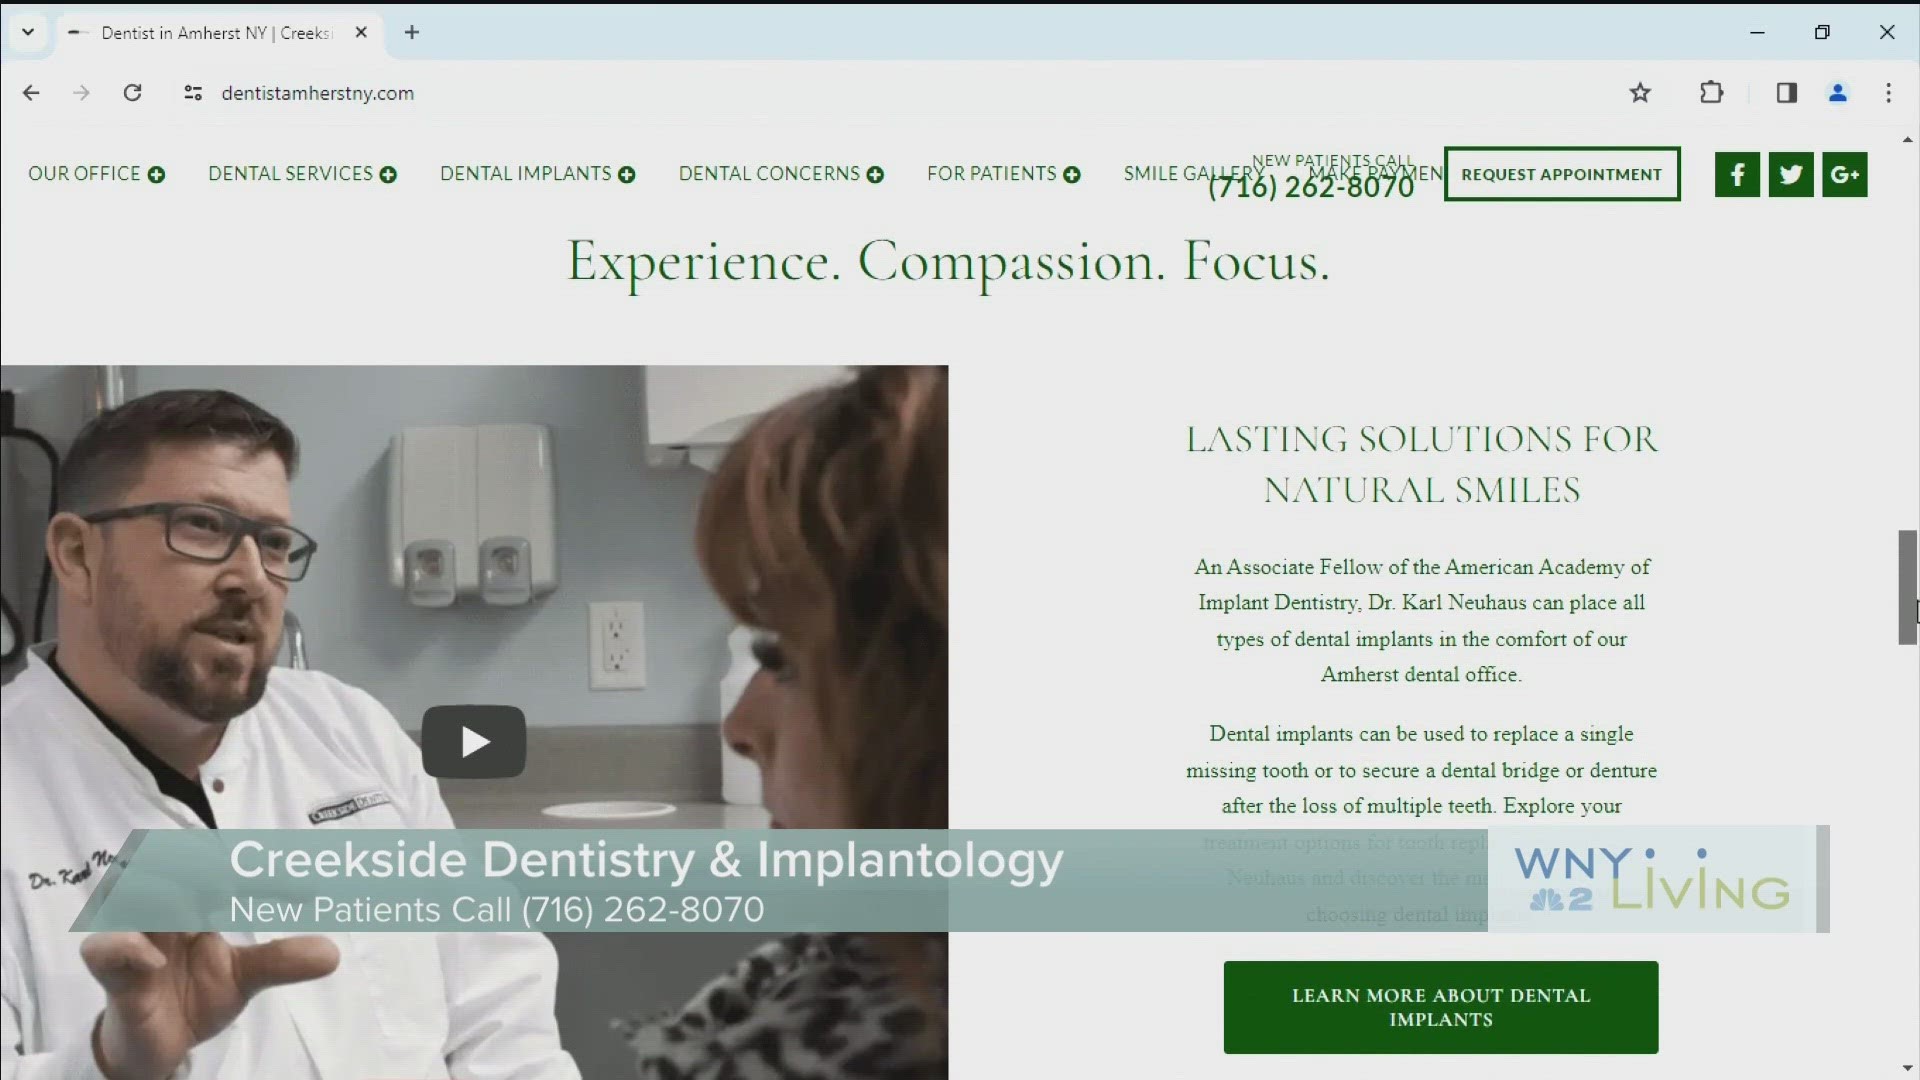 WNY Living- March 30th- Creekside Dentistry & Implantology (THIS VIDEO IS SPONSORED BY CREEKSIDE DENTISTRY & IMPLANTOLOGY)